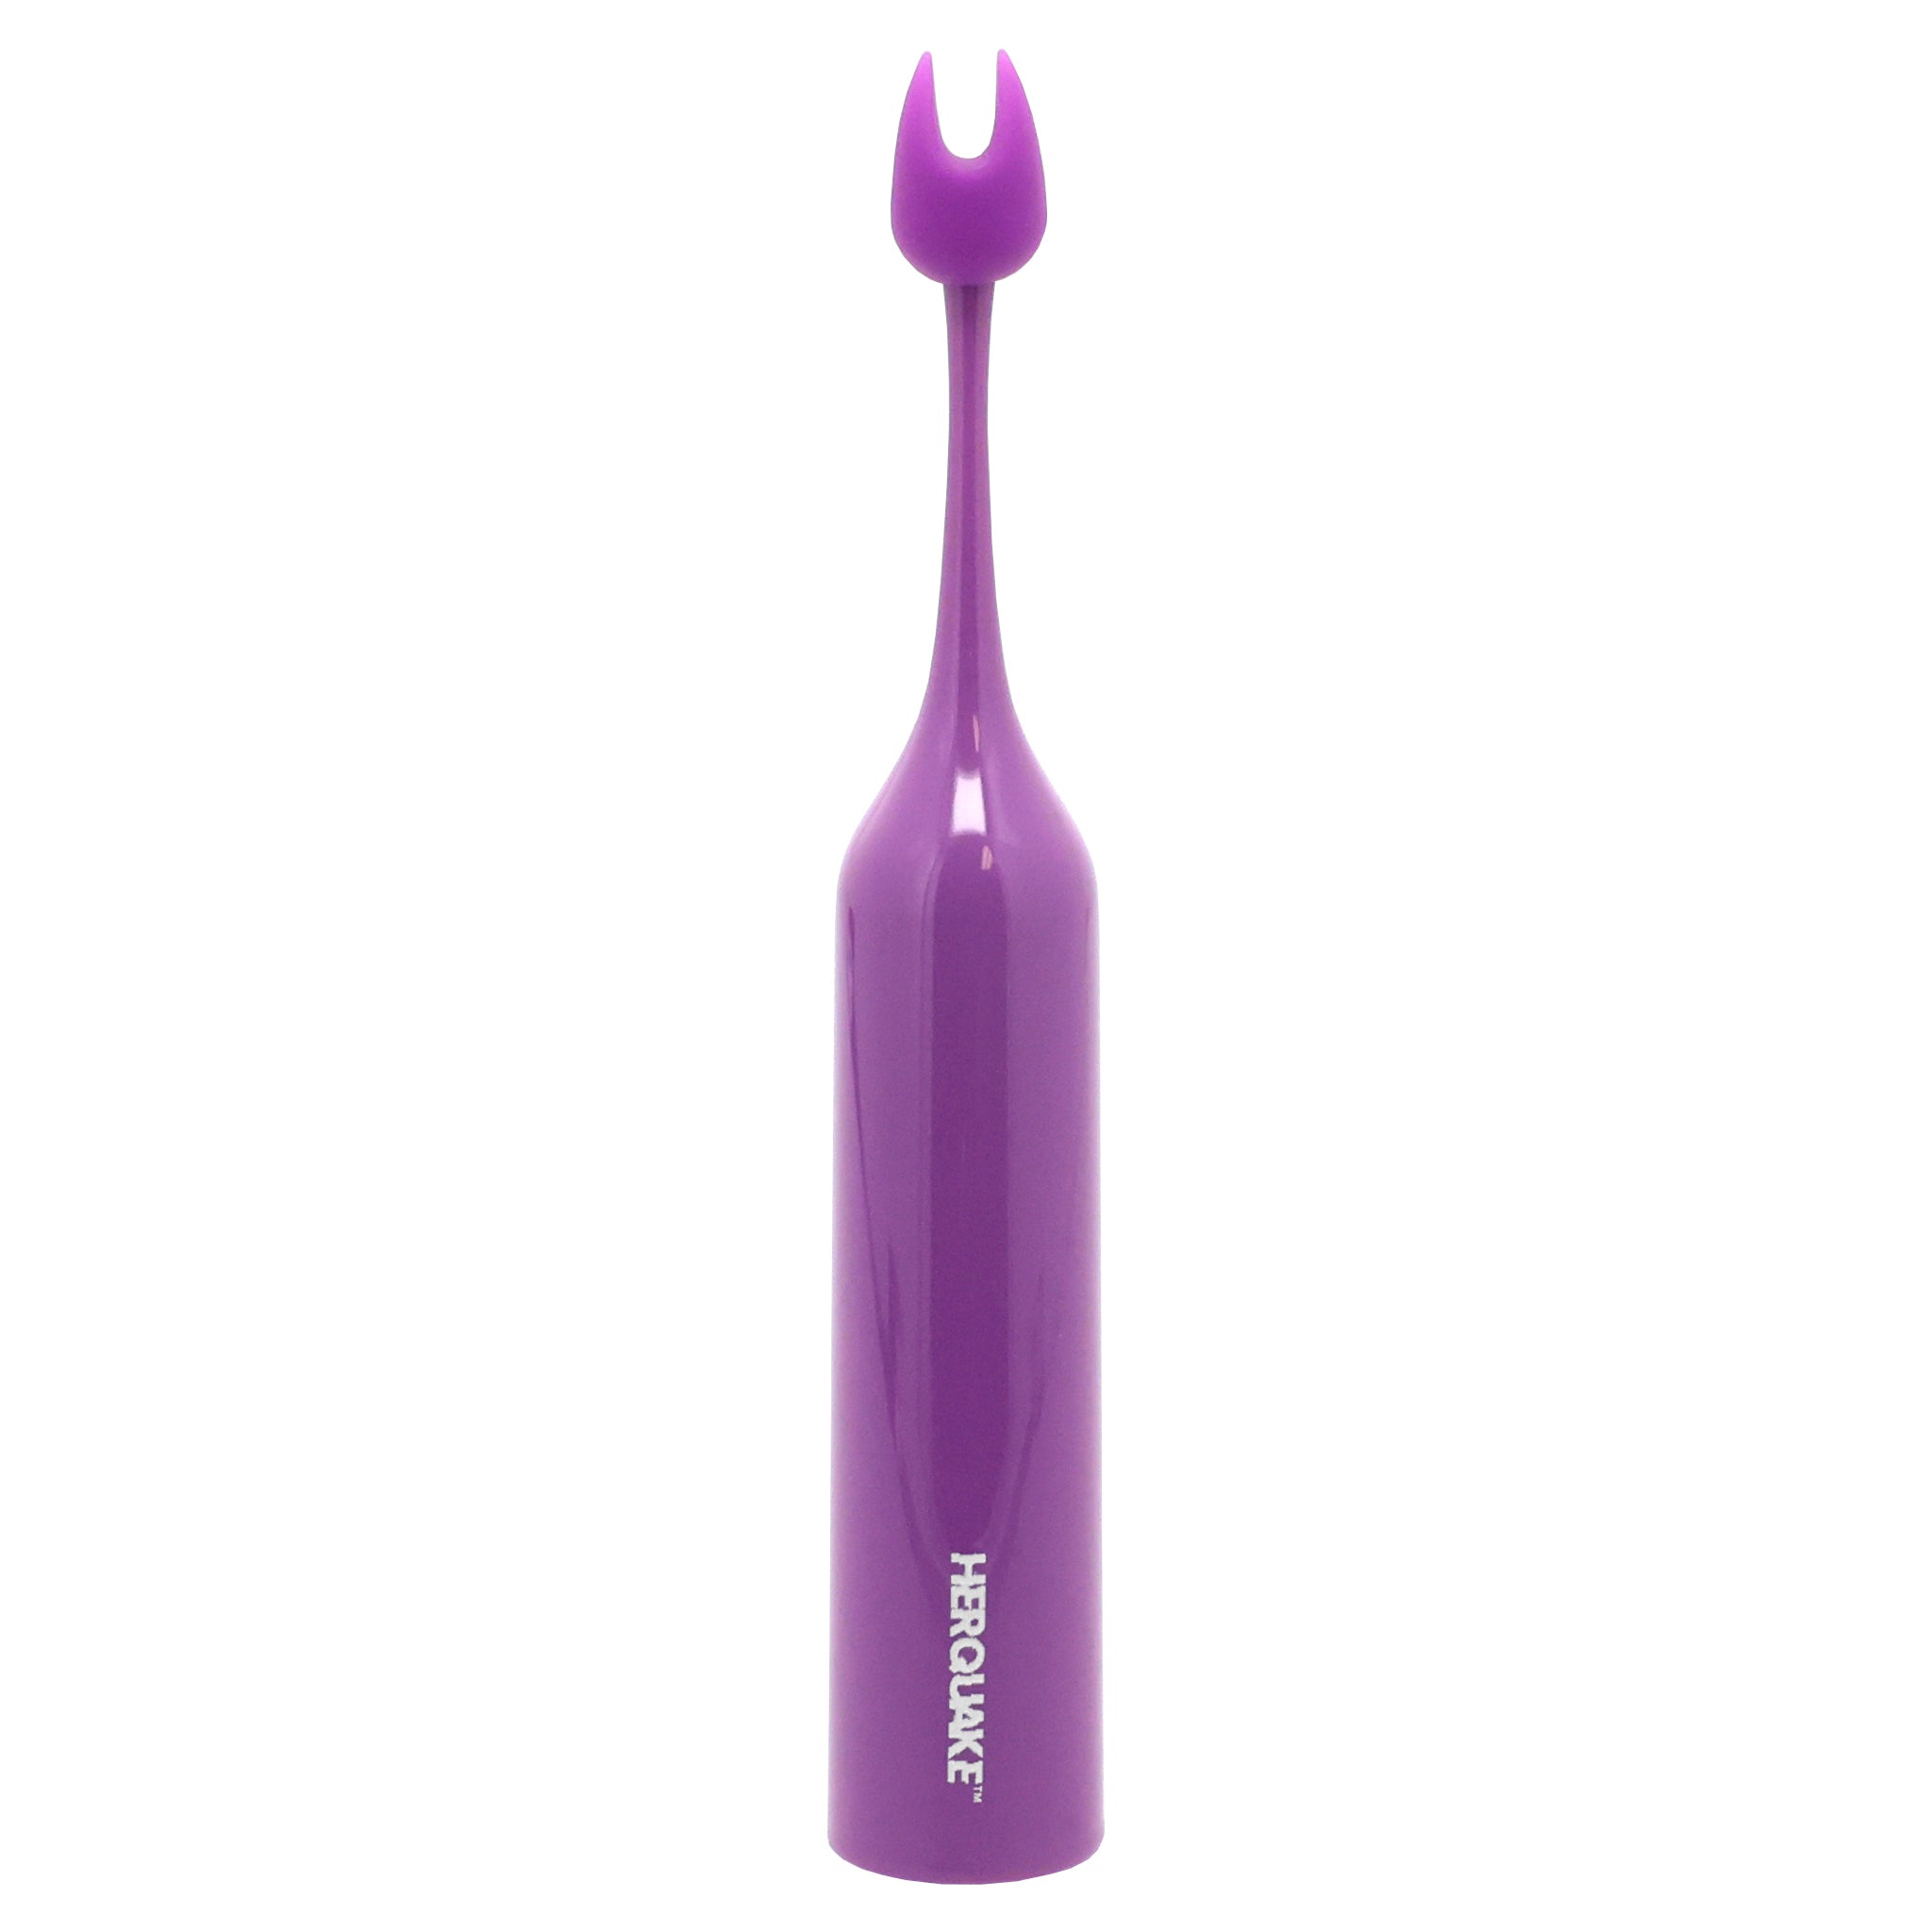 Powerful Pinpoint Wand Vibrator - The Seismic